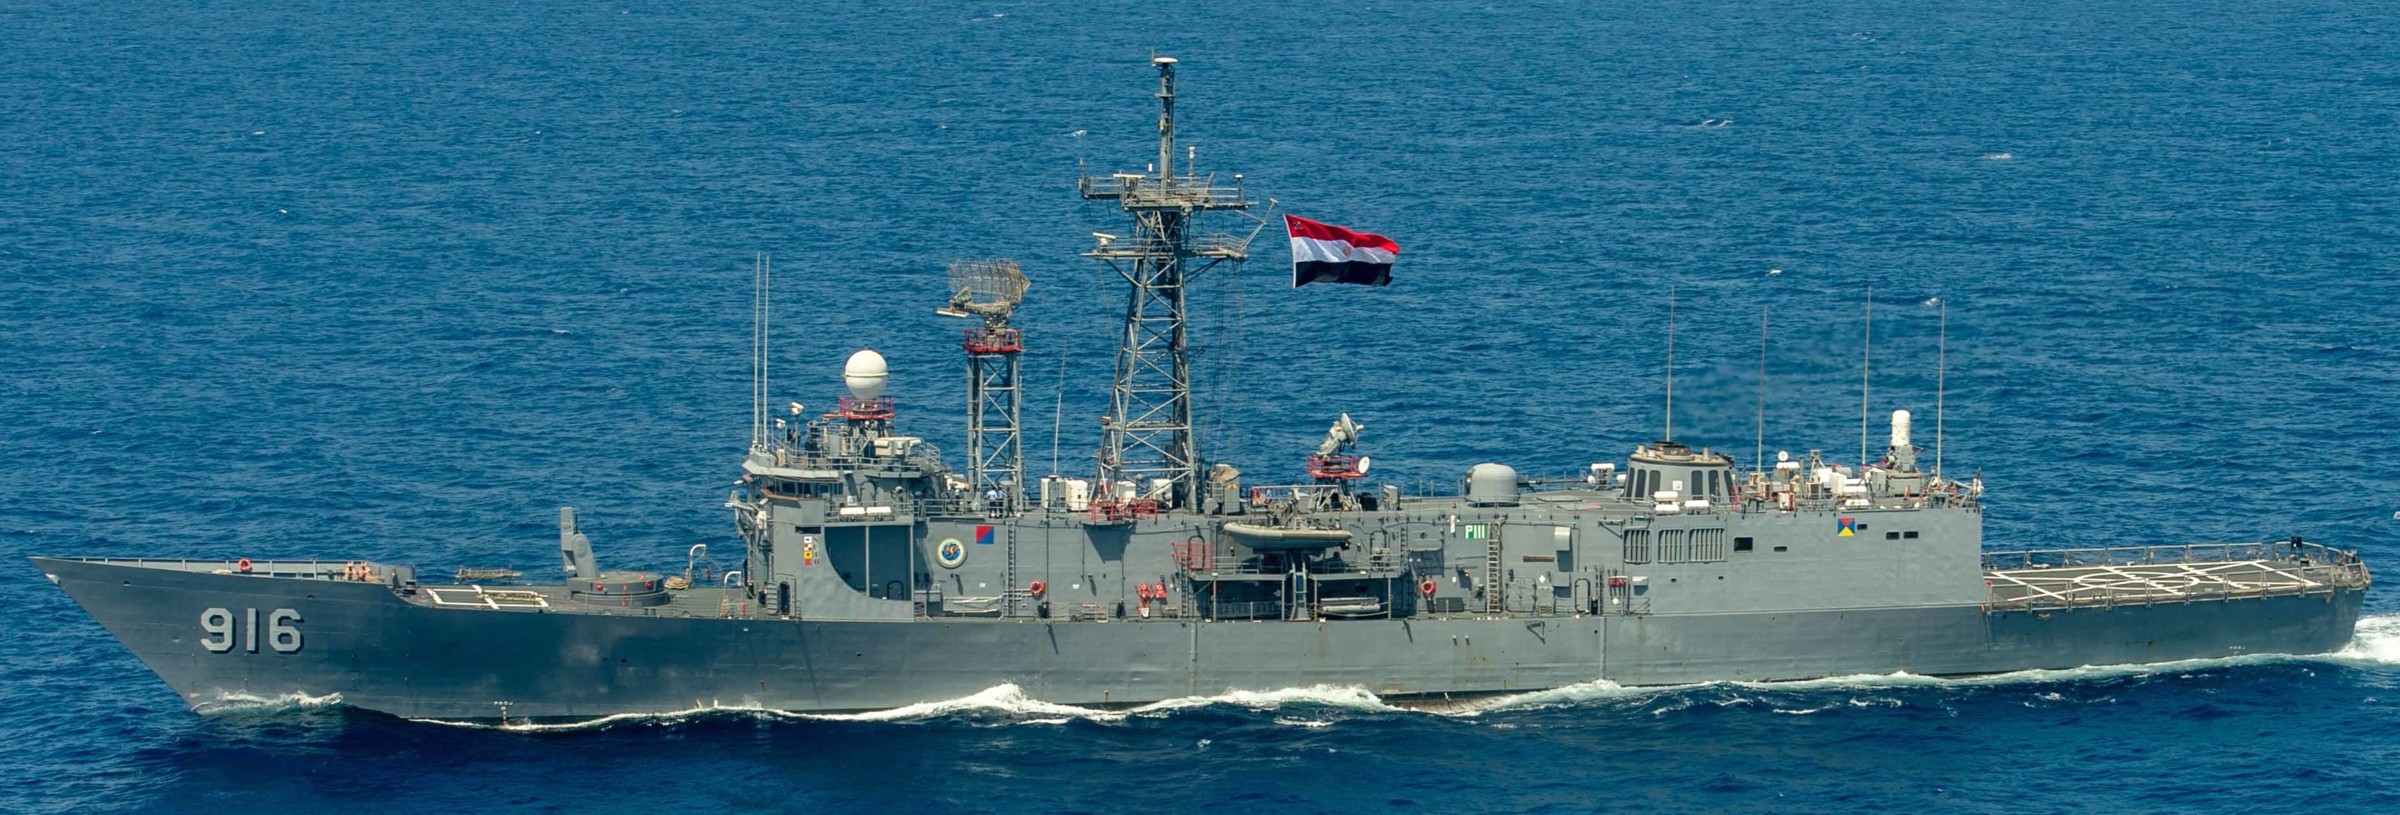 f-916 ens taba perry class frigate egyptian naval force navy 08